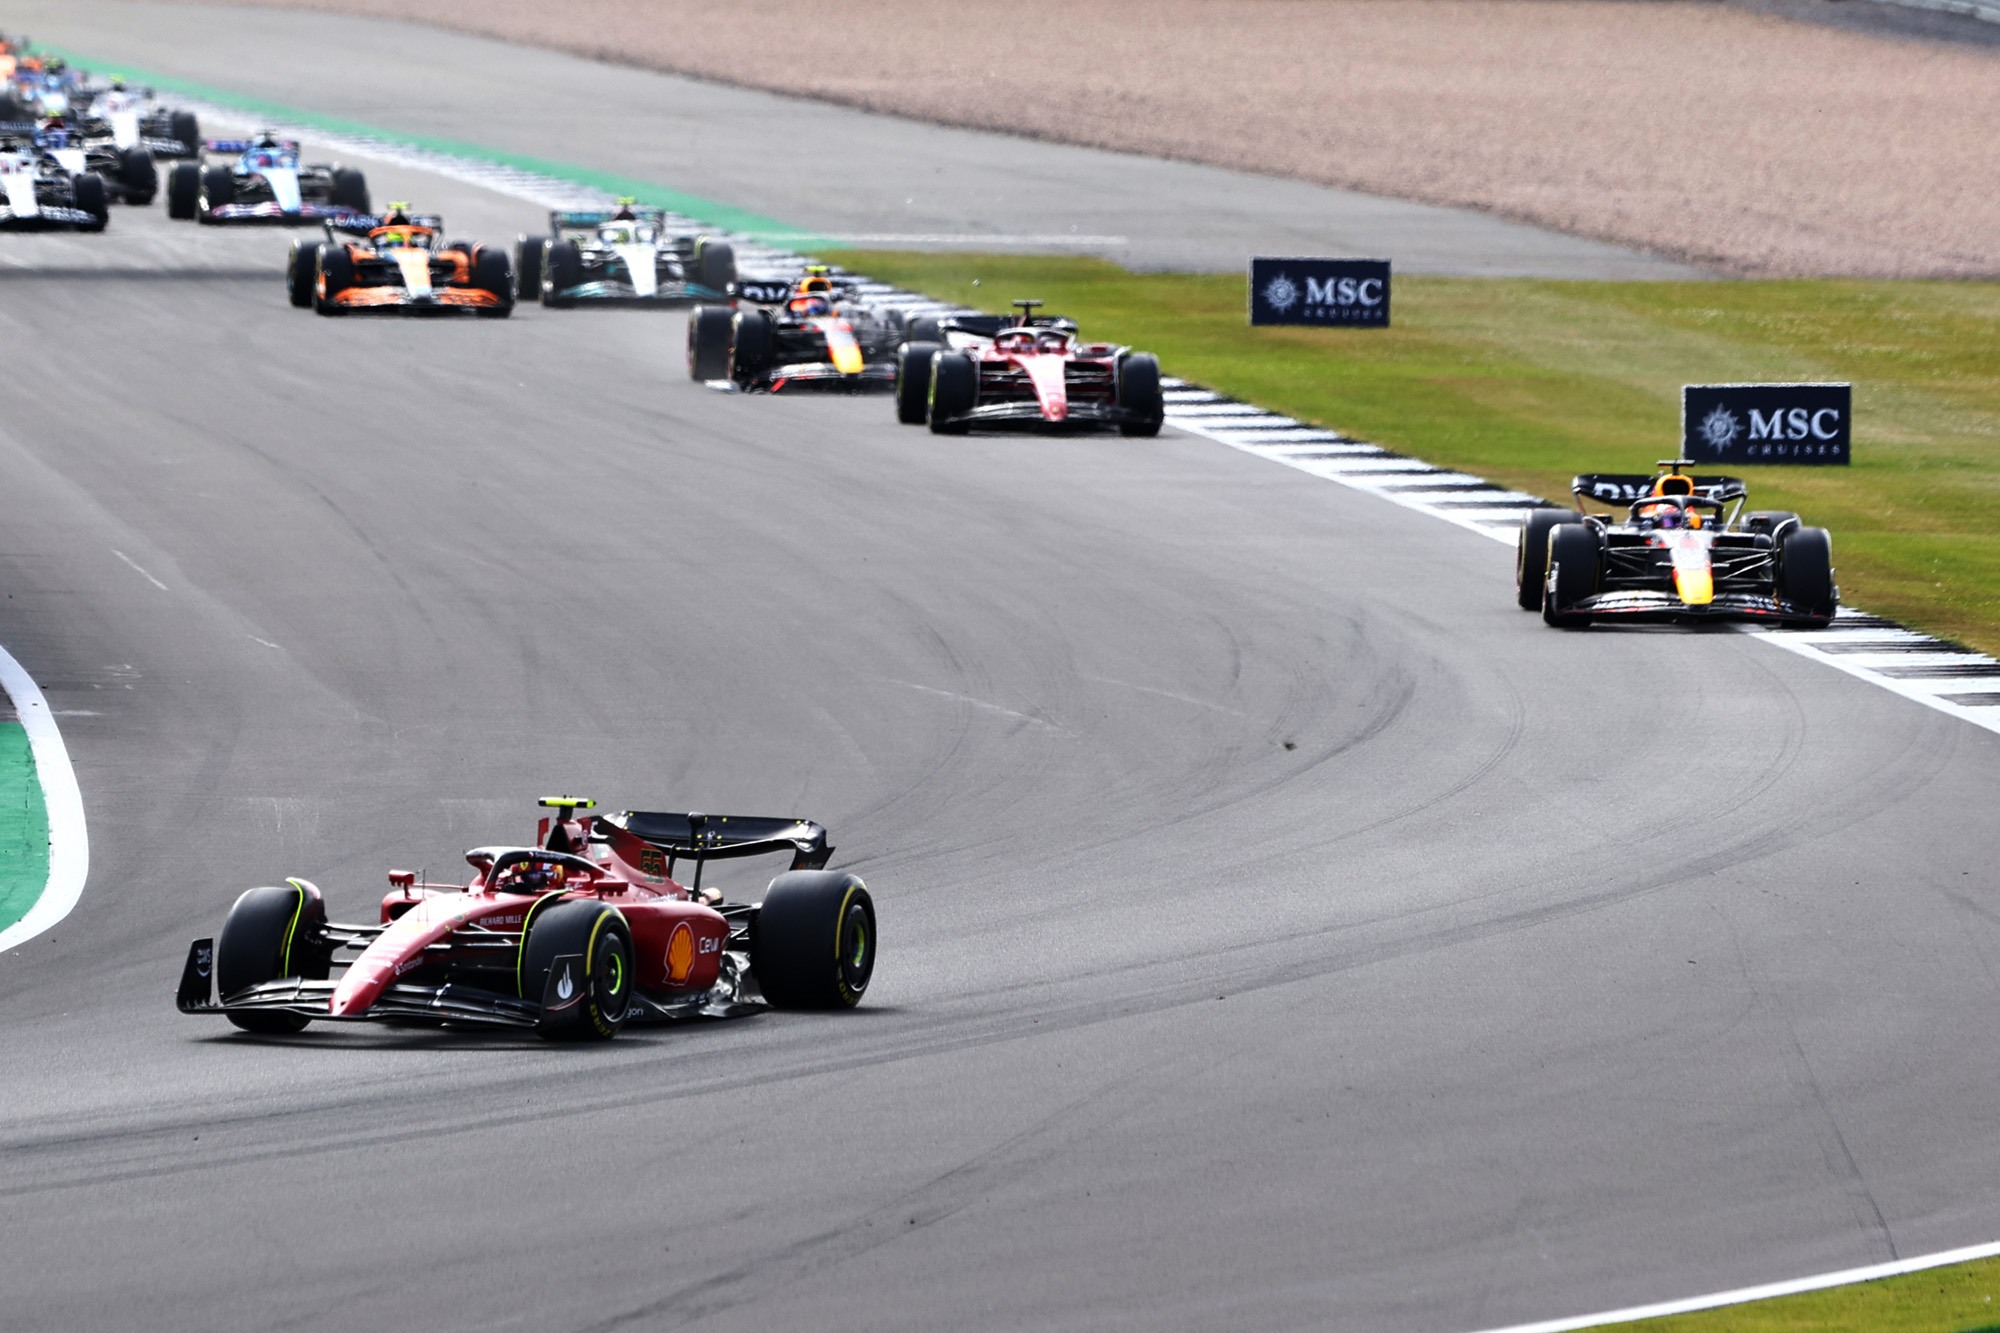 Formula 1 coverage is racing into pole position Royal Television Society